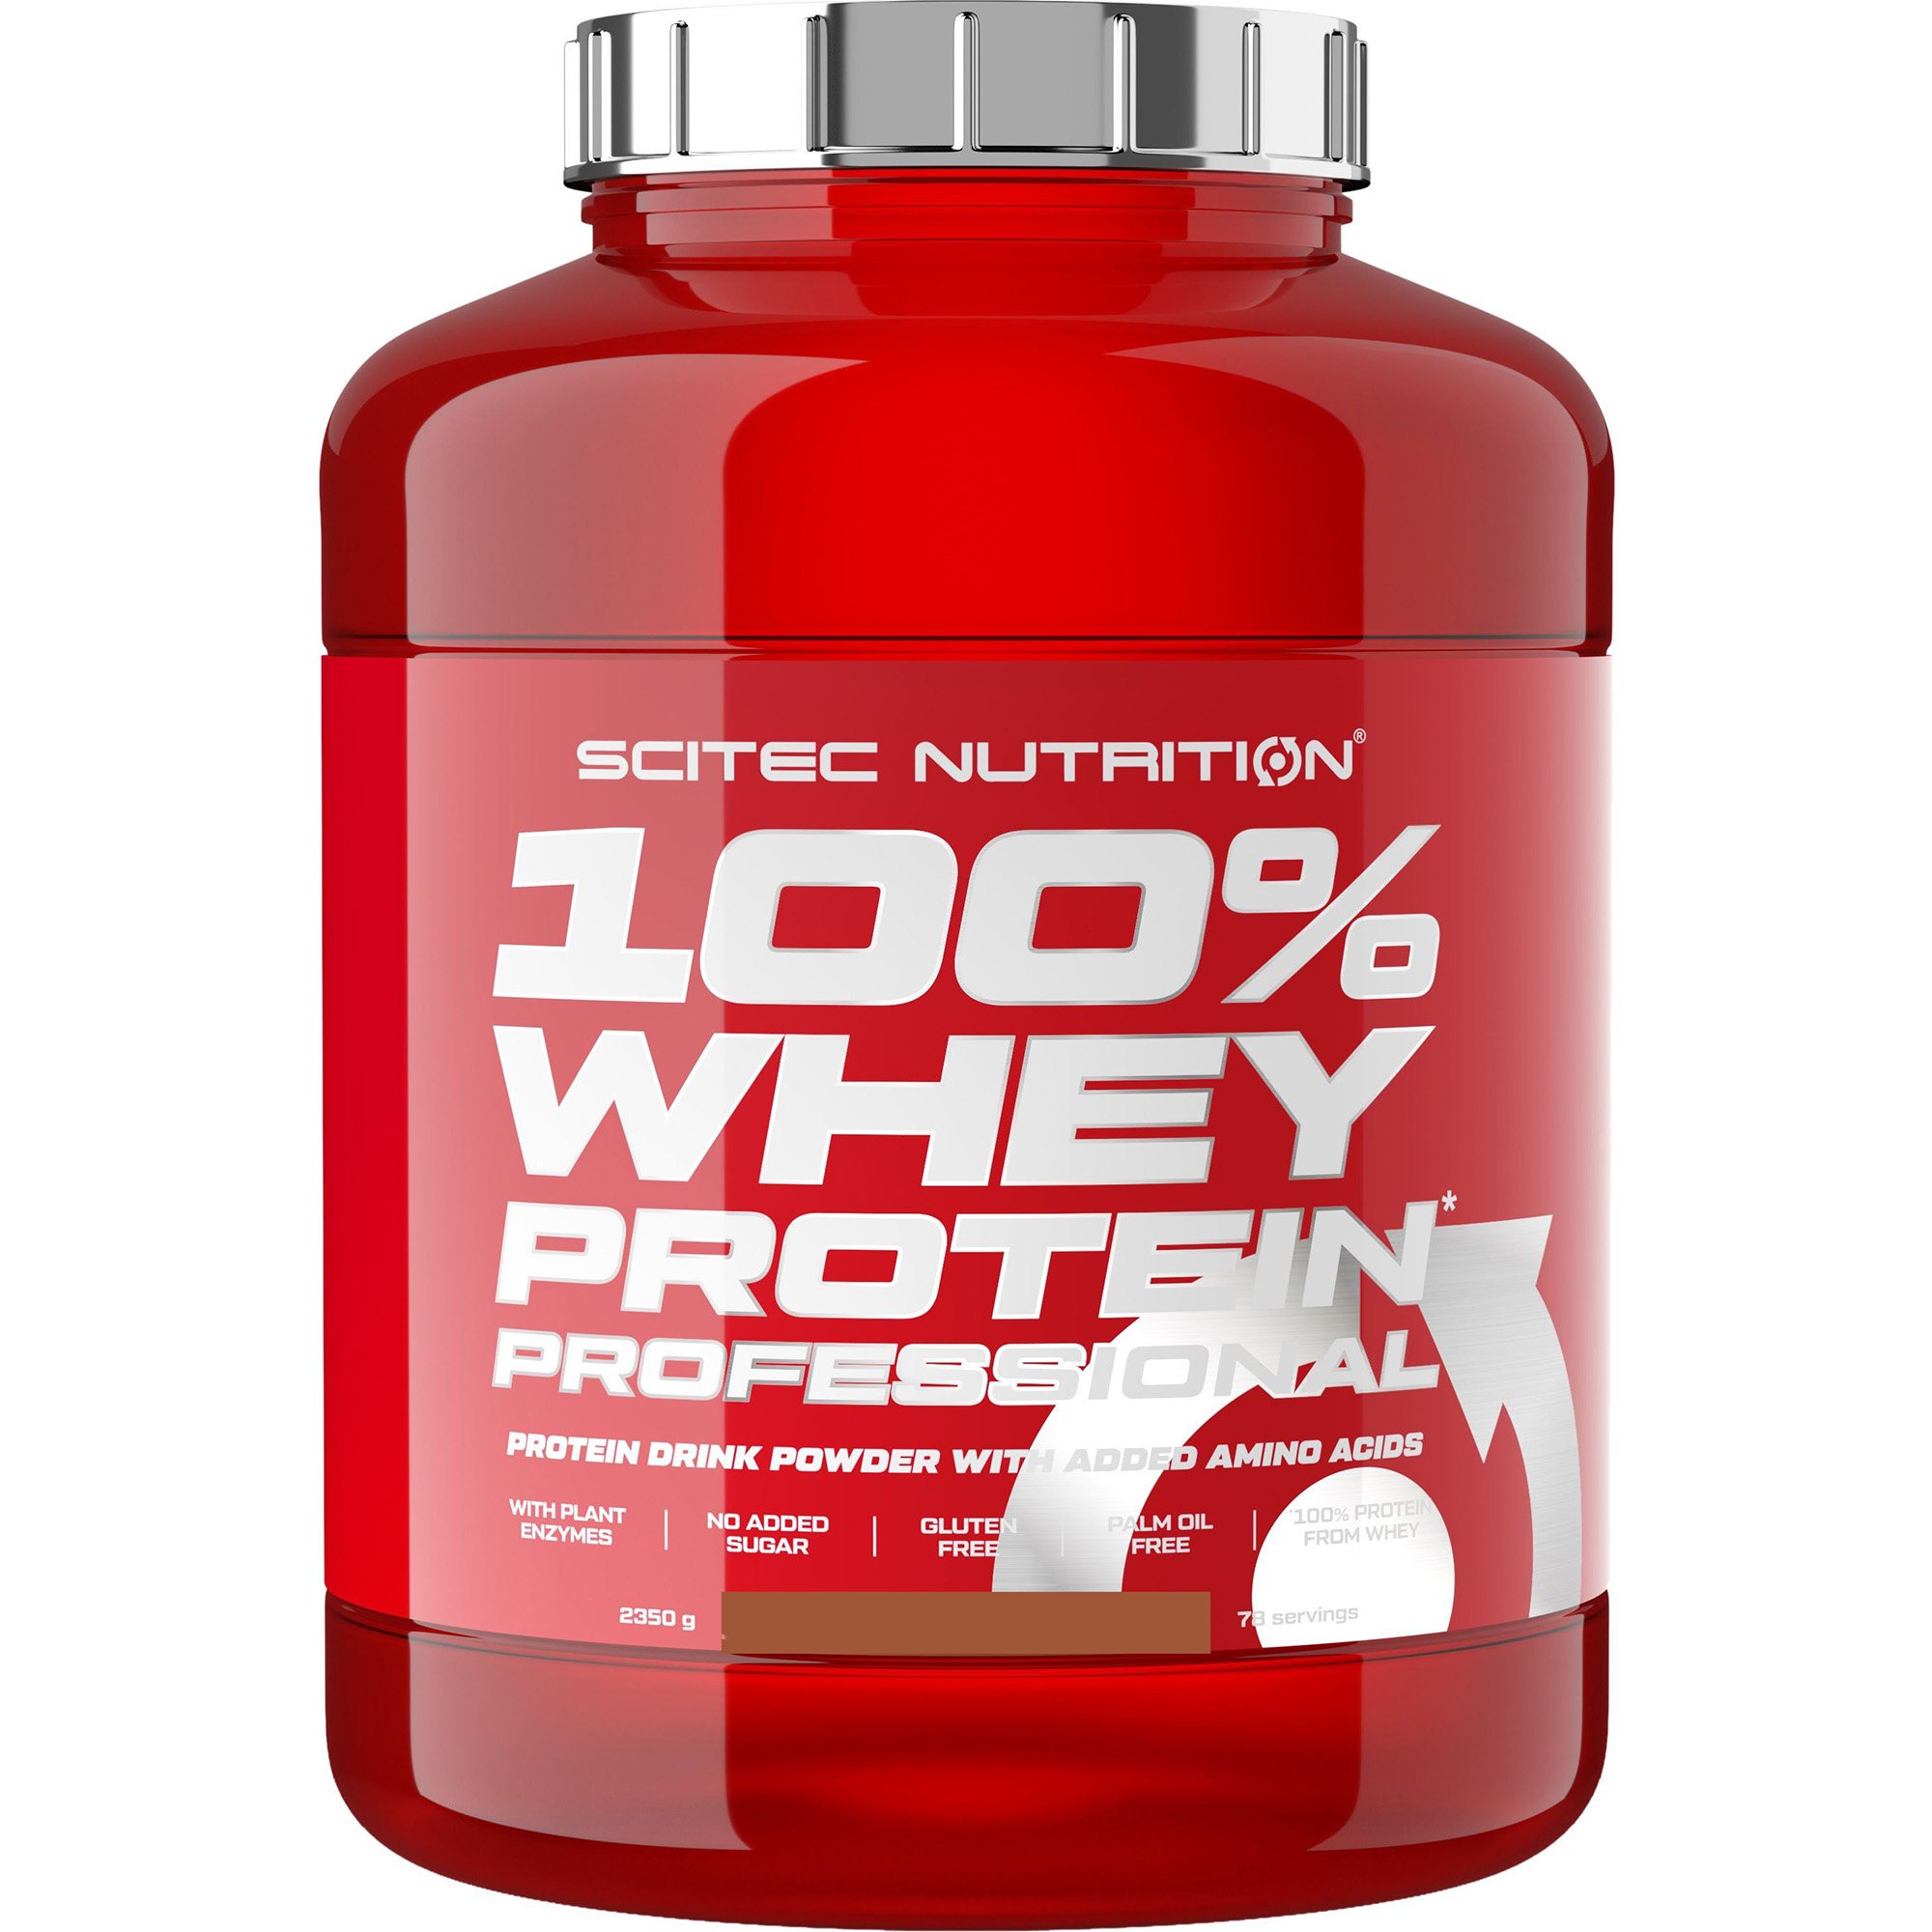 Протеин Scitec Nutrition Whey Protein Professional Salted Caramel 2.35 кг - фото 1